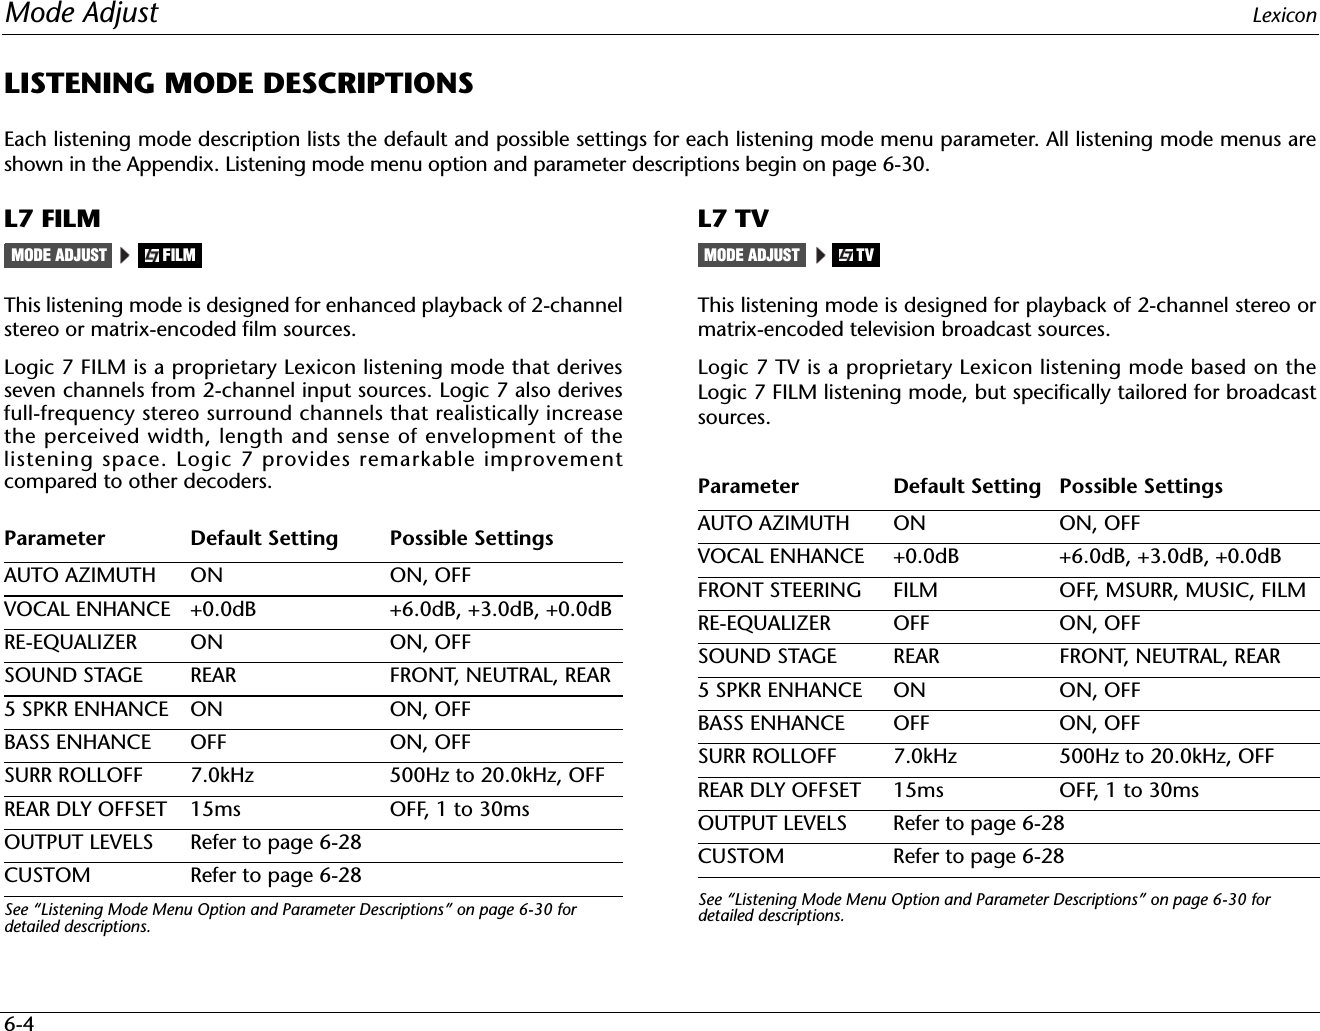 Mode Adjust Lexicon6-4LISTENING MODE DESCRIPTIONSEach listening mode description lists the default and possible settings for each listening mode menu parameter. All listening mode menus areshown in the Appendix. Listening mode menu option and parameter descriptions begin on page 6-30.L7 FILMThis listening mode is designed for enhanced playback of 2-channelstereo or matrix-encoded film sources. Logic 7 FILM is a proprietary Lexicon listening mode that derivesseven channels from 2-channel input sources. Logic 7 also derivesfull-frequency stereo surround channels that realistically increasethe perceived width, length and sense of envelopment of thelistening space. Logic 7 provides remarkable improvementcompared to other decoders.See “Listening Mode Menu Option and Parameter Descriptions” on page 6-30 for detailed descriptions.L7 TVThis listening mode is designed for playback of 2-channel stereo ormatrix-encoded television broadcast sources.Logic 7 TV is a proprietary Lexicon listening mode based on theLogic 7 FILM listening mode, but specifically tailored for broadcastsources.See “Listening Mode Menu Option and Parameter Descriptions” on page 6-30 for detailed descriptions.Parameter Default Setting Possible SettingsAUTO AZIMUTH ON ON, OFFVOCAL ENHANCE +0.0dB +6.0dB, +3.0dB, +0.0dBRE-EQUALIZER ON ON, OFFSOUND STAGE REAR FRONT, NEUTRAL, REAR5 SPKR ENHANCE ON ON, OFFBASS ENHANCE OFF ON, OFFSURR ROLLOFF 7.0kHz 500Hz to 20.0kHz, OFFREAR DLY OFFSET 15ms OFF, 1 to 30msOUTPUT LEVELS Refer to page 6-28CUSTOM Refer to page 6-28MODE ADJUST FILMParameter Default Setting Possible SettingsAUTO AZIMUTH ON ON, OFFVOCAL ENHANCE +0.0dB +6.0dB, +3.0dB, +0.0dBFRONT STEERING FILM OFF, MSURR, MUSIC, FILMRE-EQUALIZER OFF ON, OFFSOUND STAGE REAR FRONT, NEUTRAL, REAR5 SPKR ENHANCE ON ON, OFFBASS ENHANCE OFF ON, OFFSURR ROLLOFF 7.0kHz 500Hz to 20.0kHz, OFFREAR DLY OFFSET 15ms OFF, 1 to 30msOUTPUT LEVELS  Refer to page 6-28CUSTOM Refer to page 6-28MODE ADJUST TV